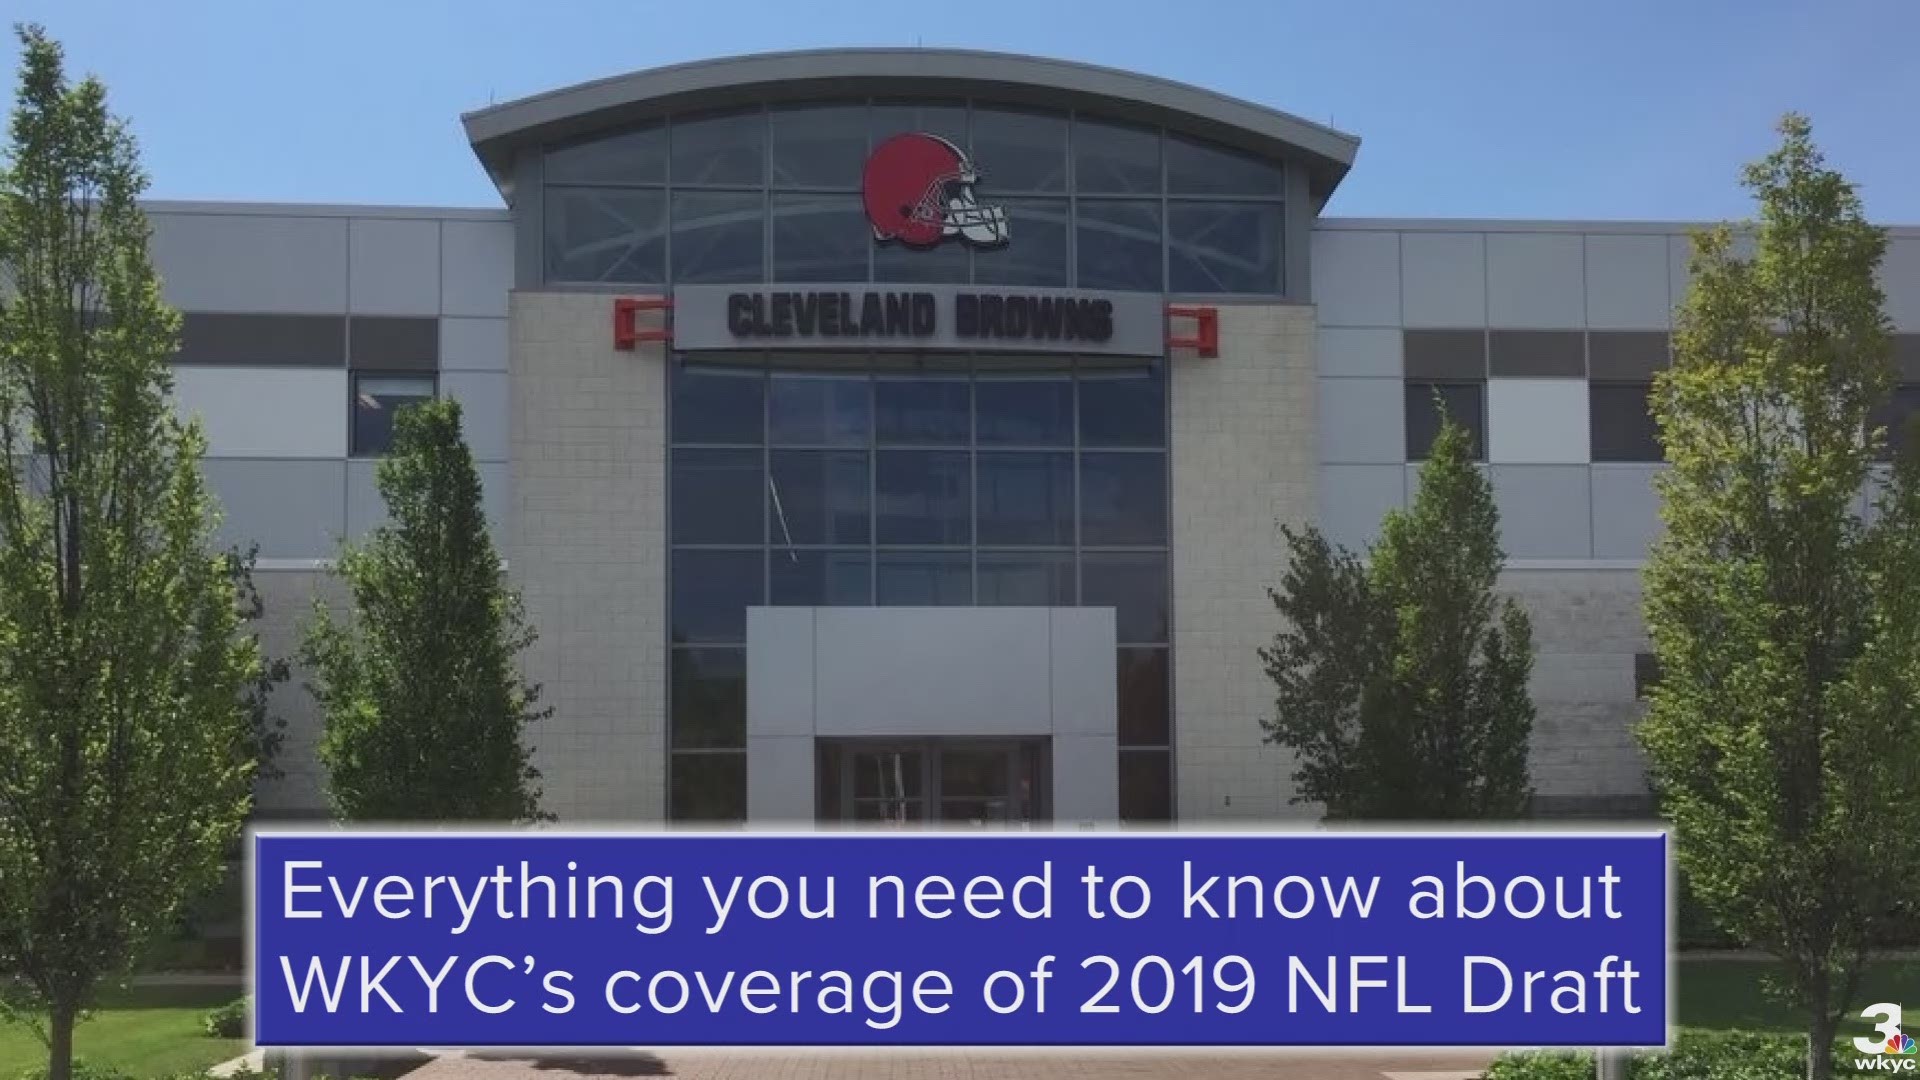 Here is a look at how WKYC.com will cover the 2019 NFL Draft.